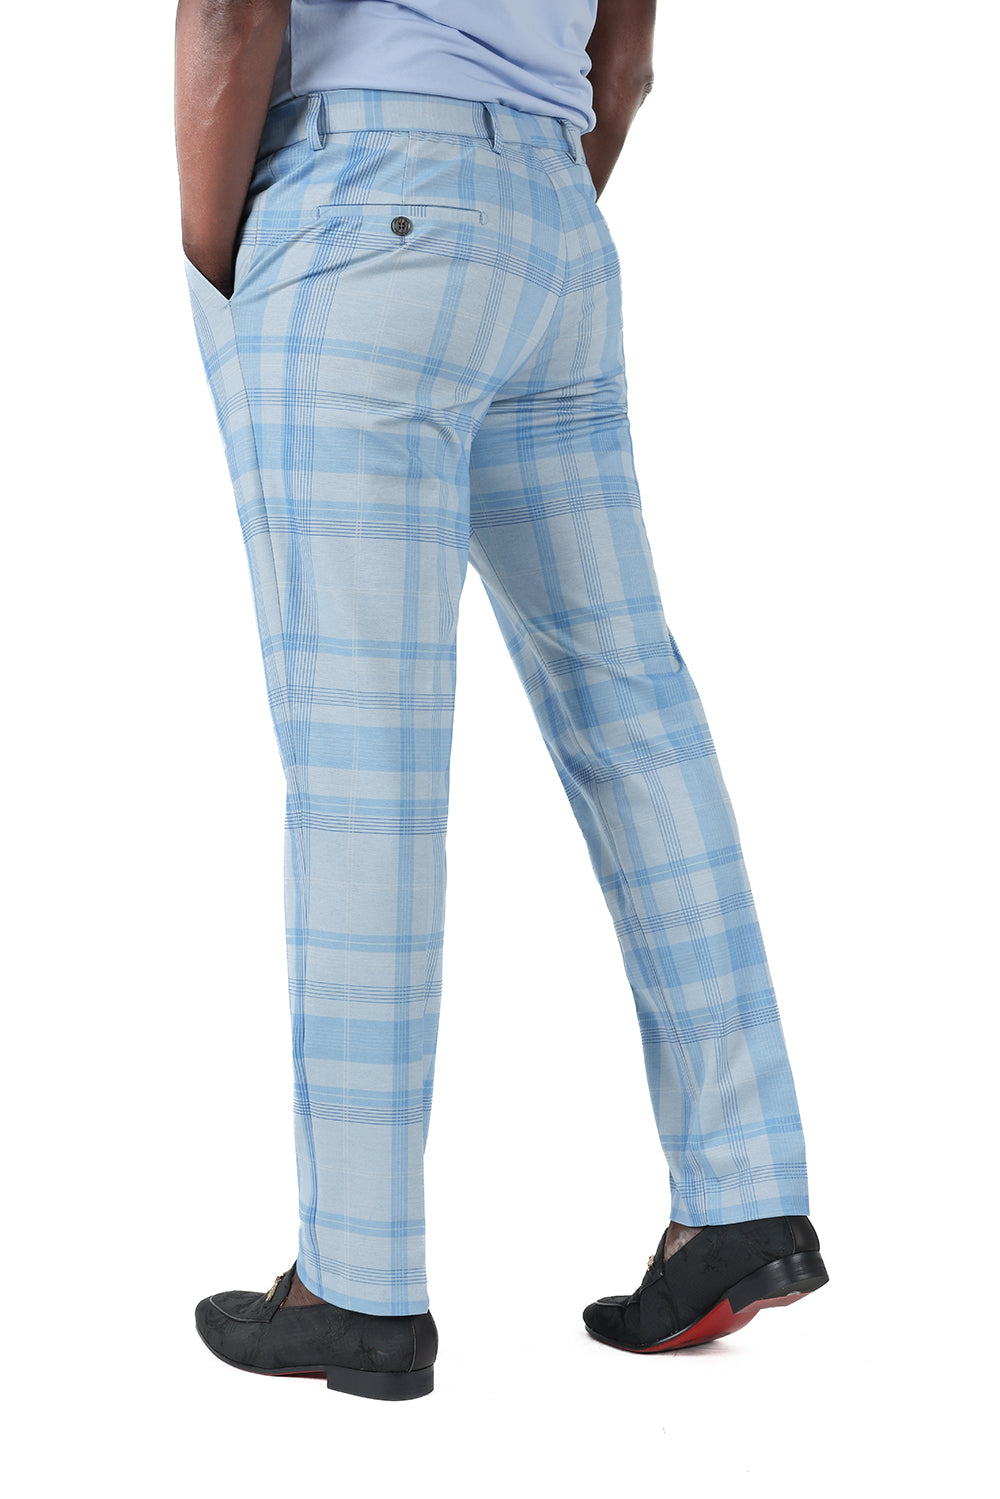 Barabas Men's Printed Checkered Design Red Sky Blue Chino Pants CP182 Sky